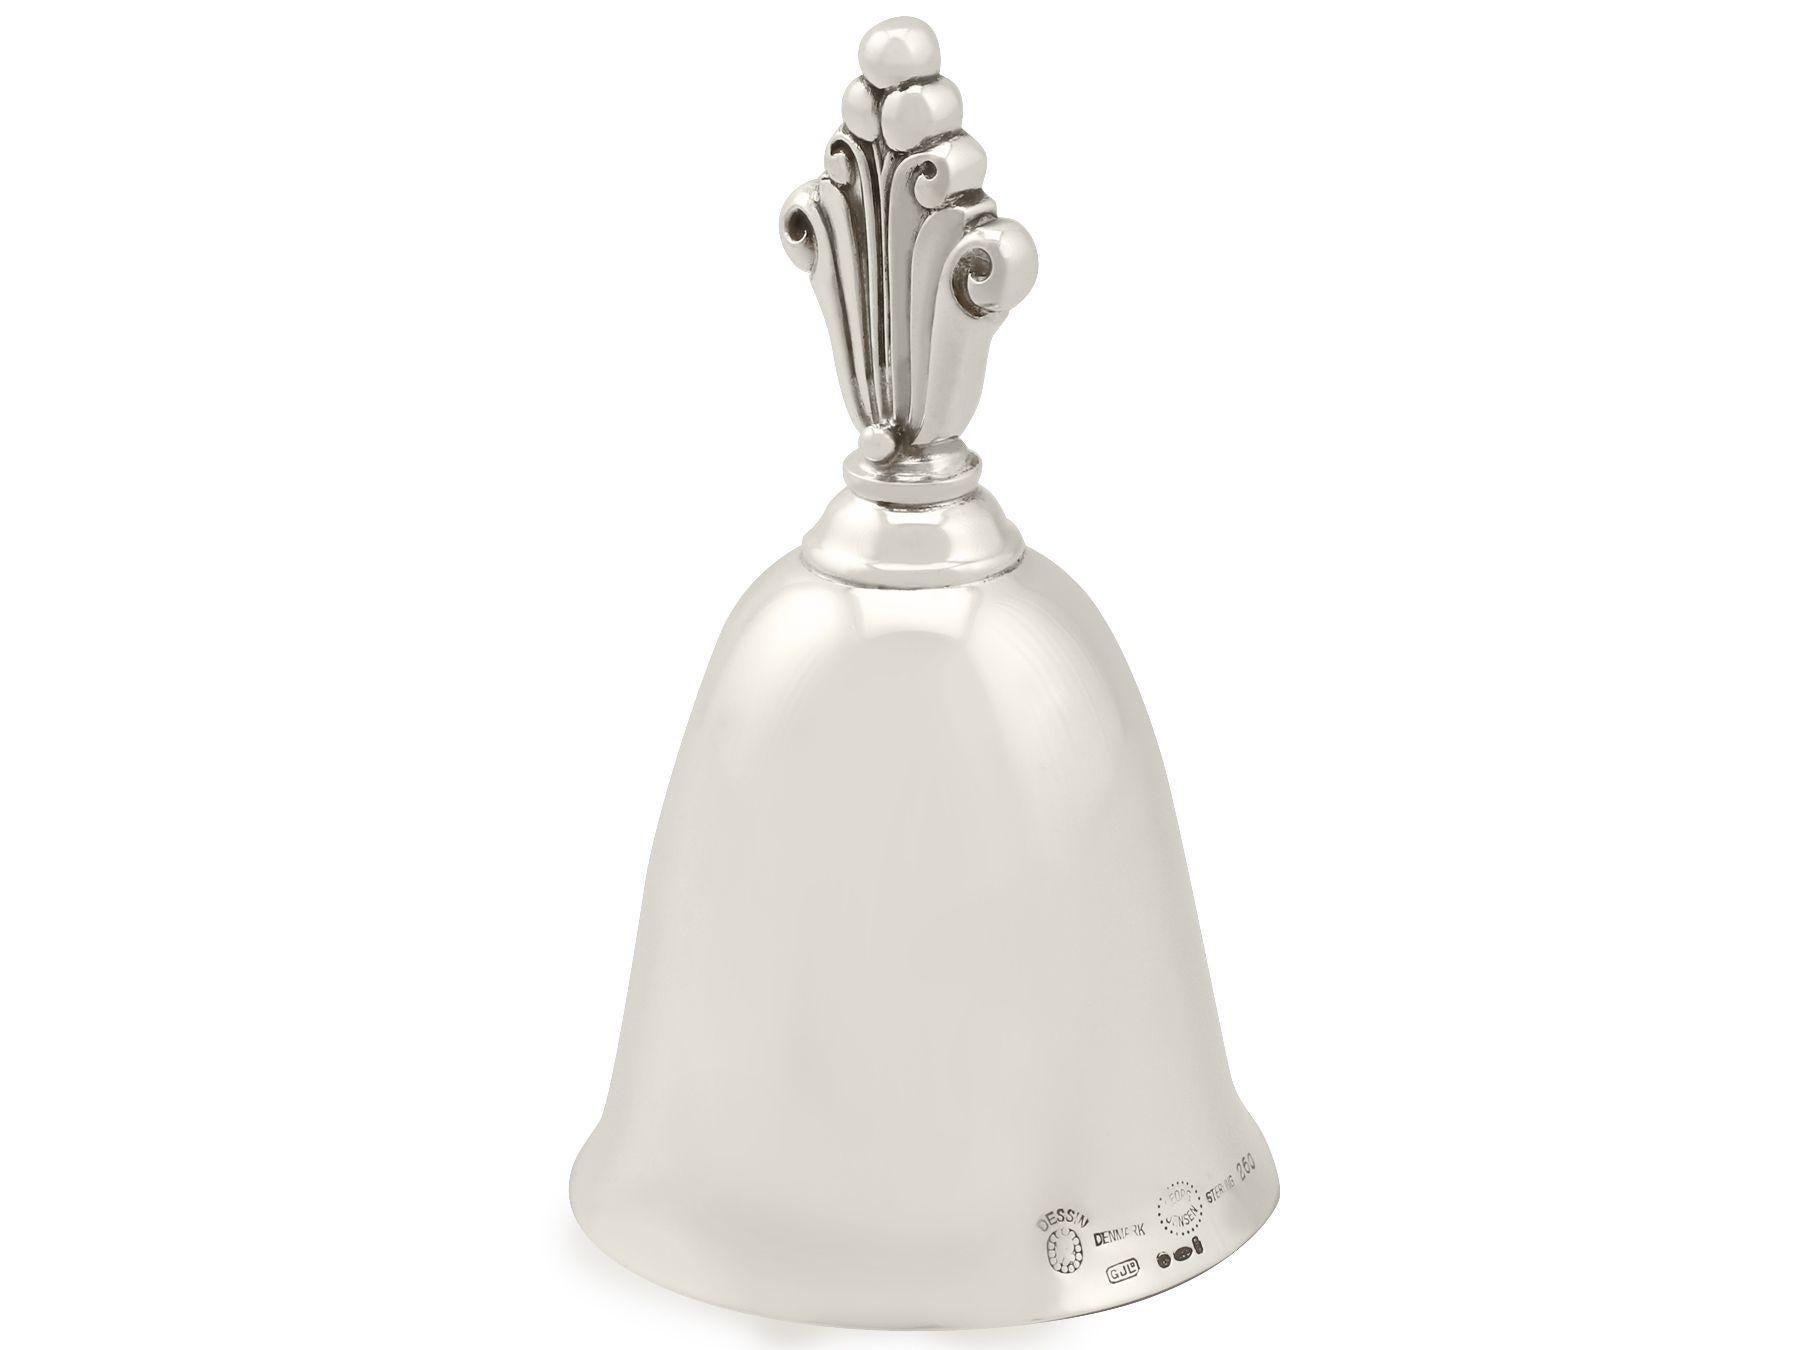 An exceptional, fine and impressive vintage Danish sterling silver table bell made by Georg Jensen; an addition to our range of ornamental silverware.

This exceptional vintage Danish sterling silver table bell has a plain bell shaped form.

The